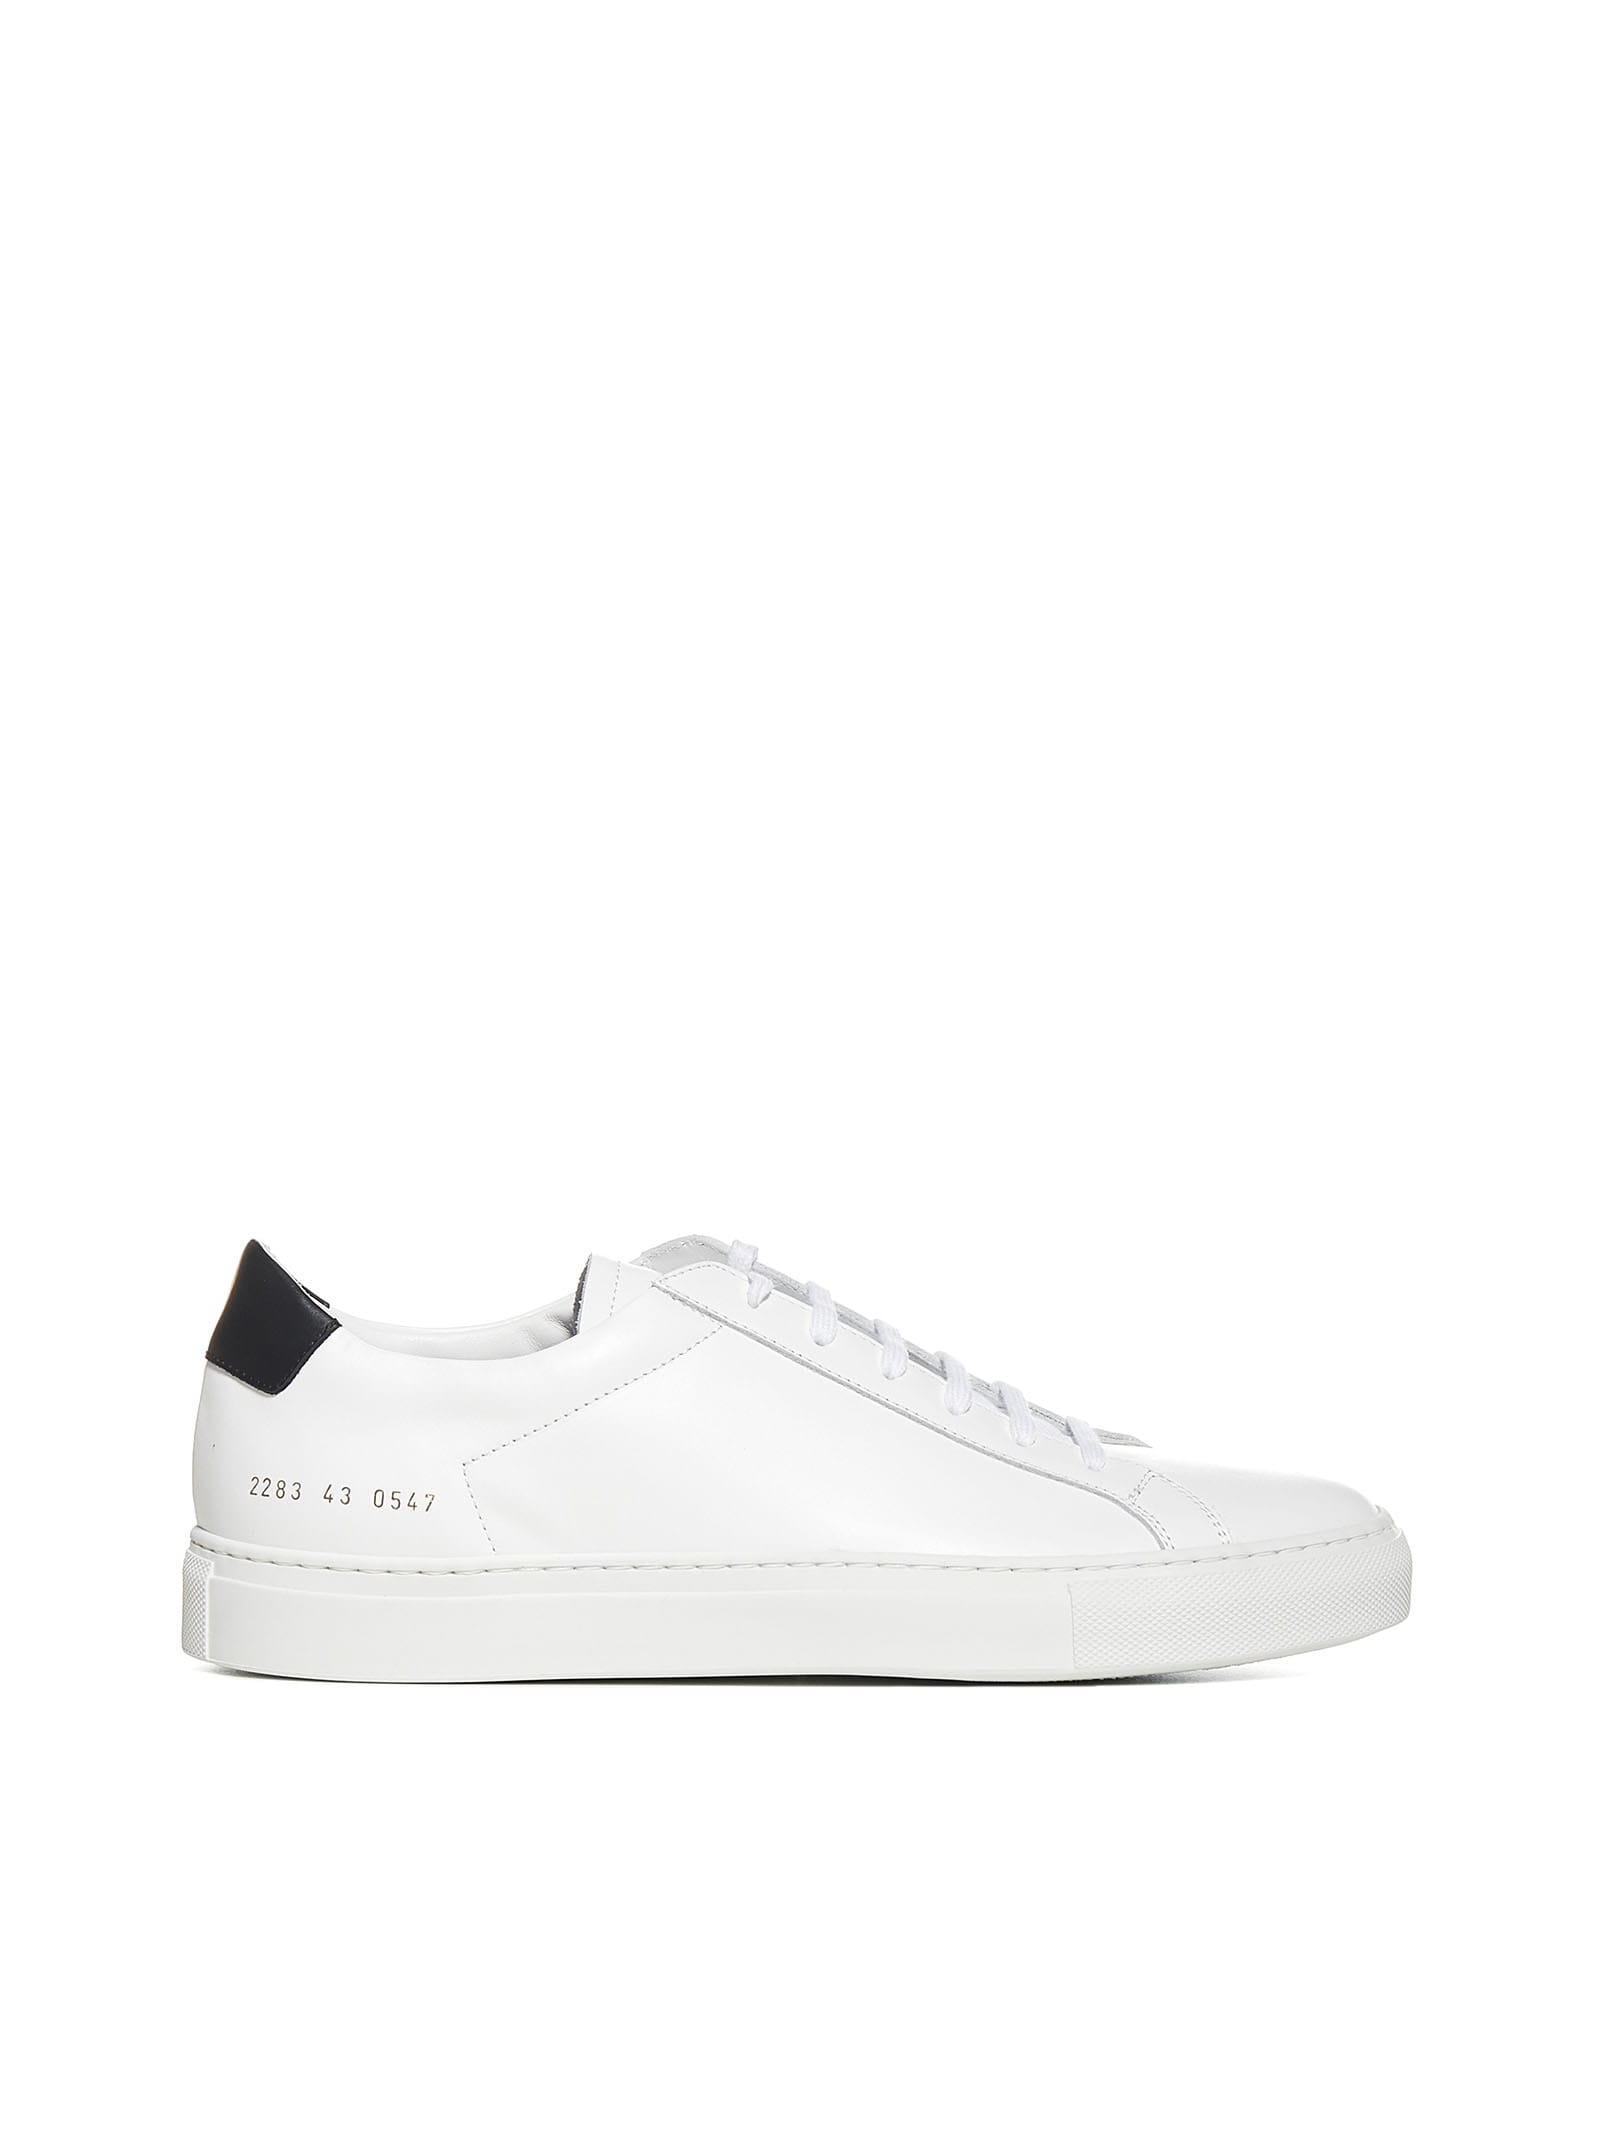 black white common projects